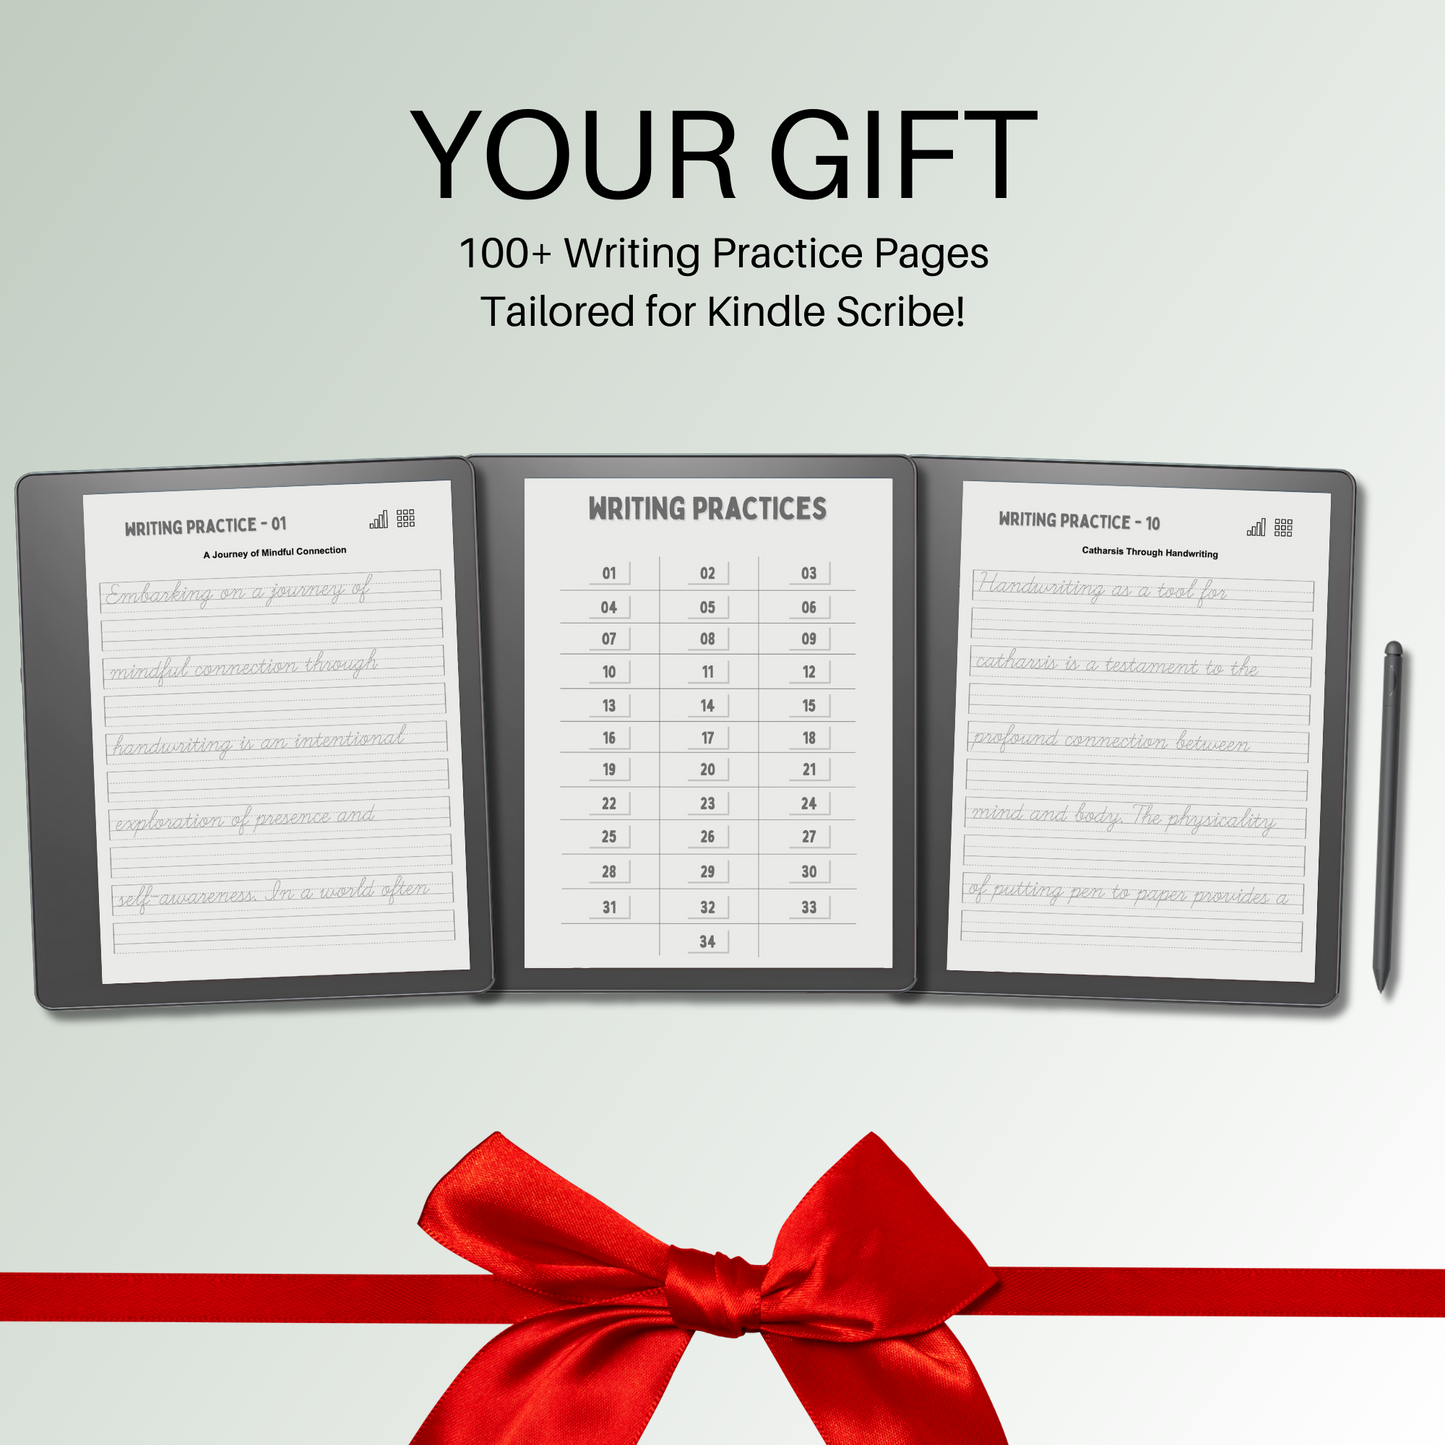 Kindle Scribe Handwriting Pages as Gift.